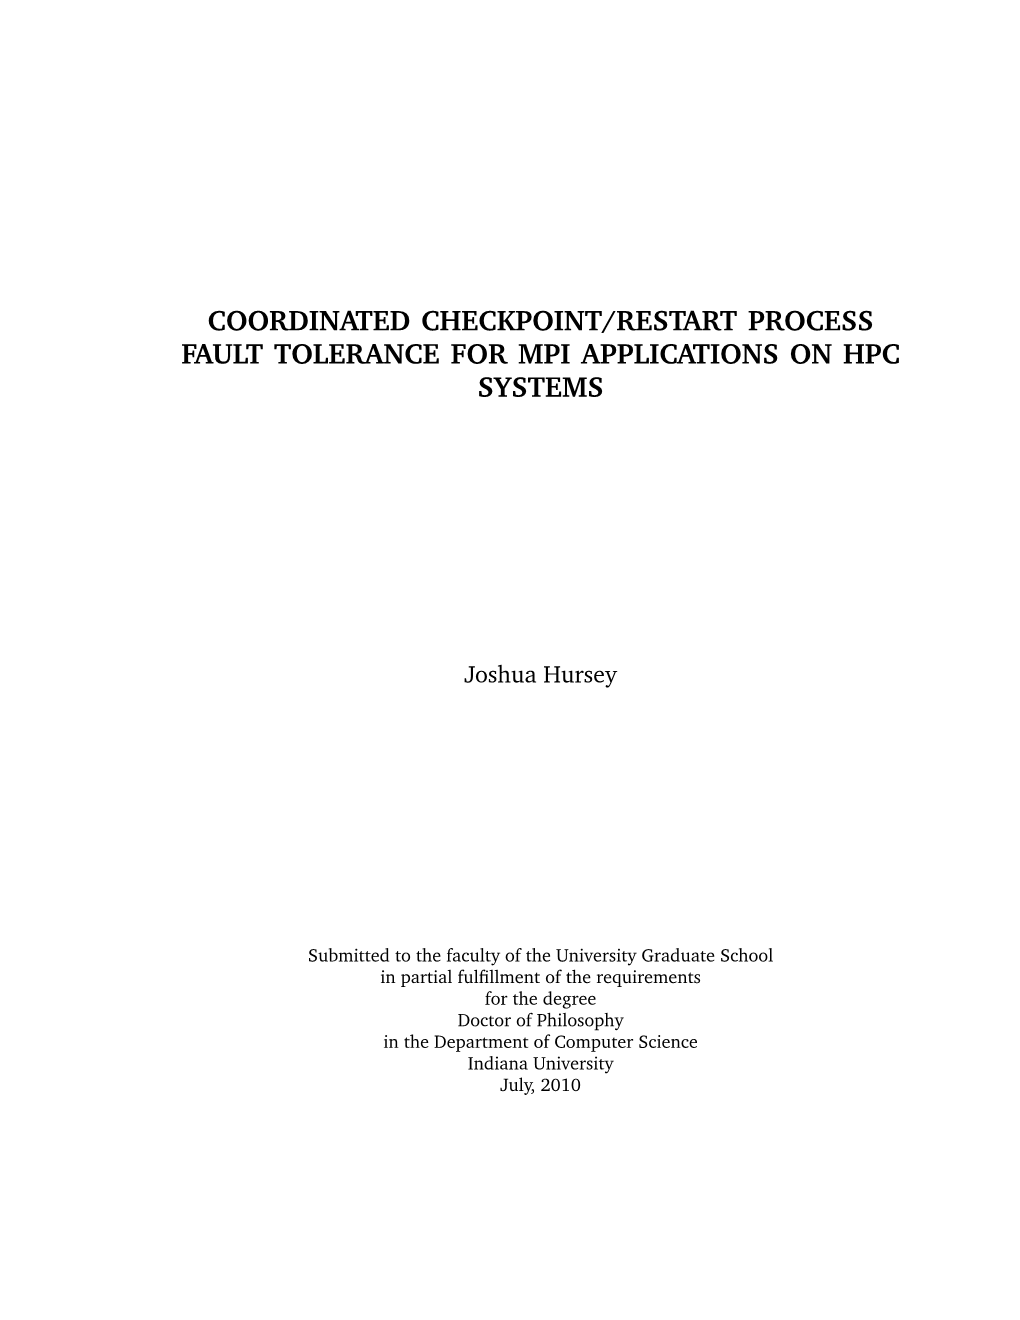 Coordinated Checkpoint/Restart Process Fault Tolerance for Mpi Applications on Hpc Systems